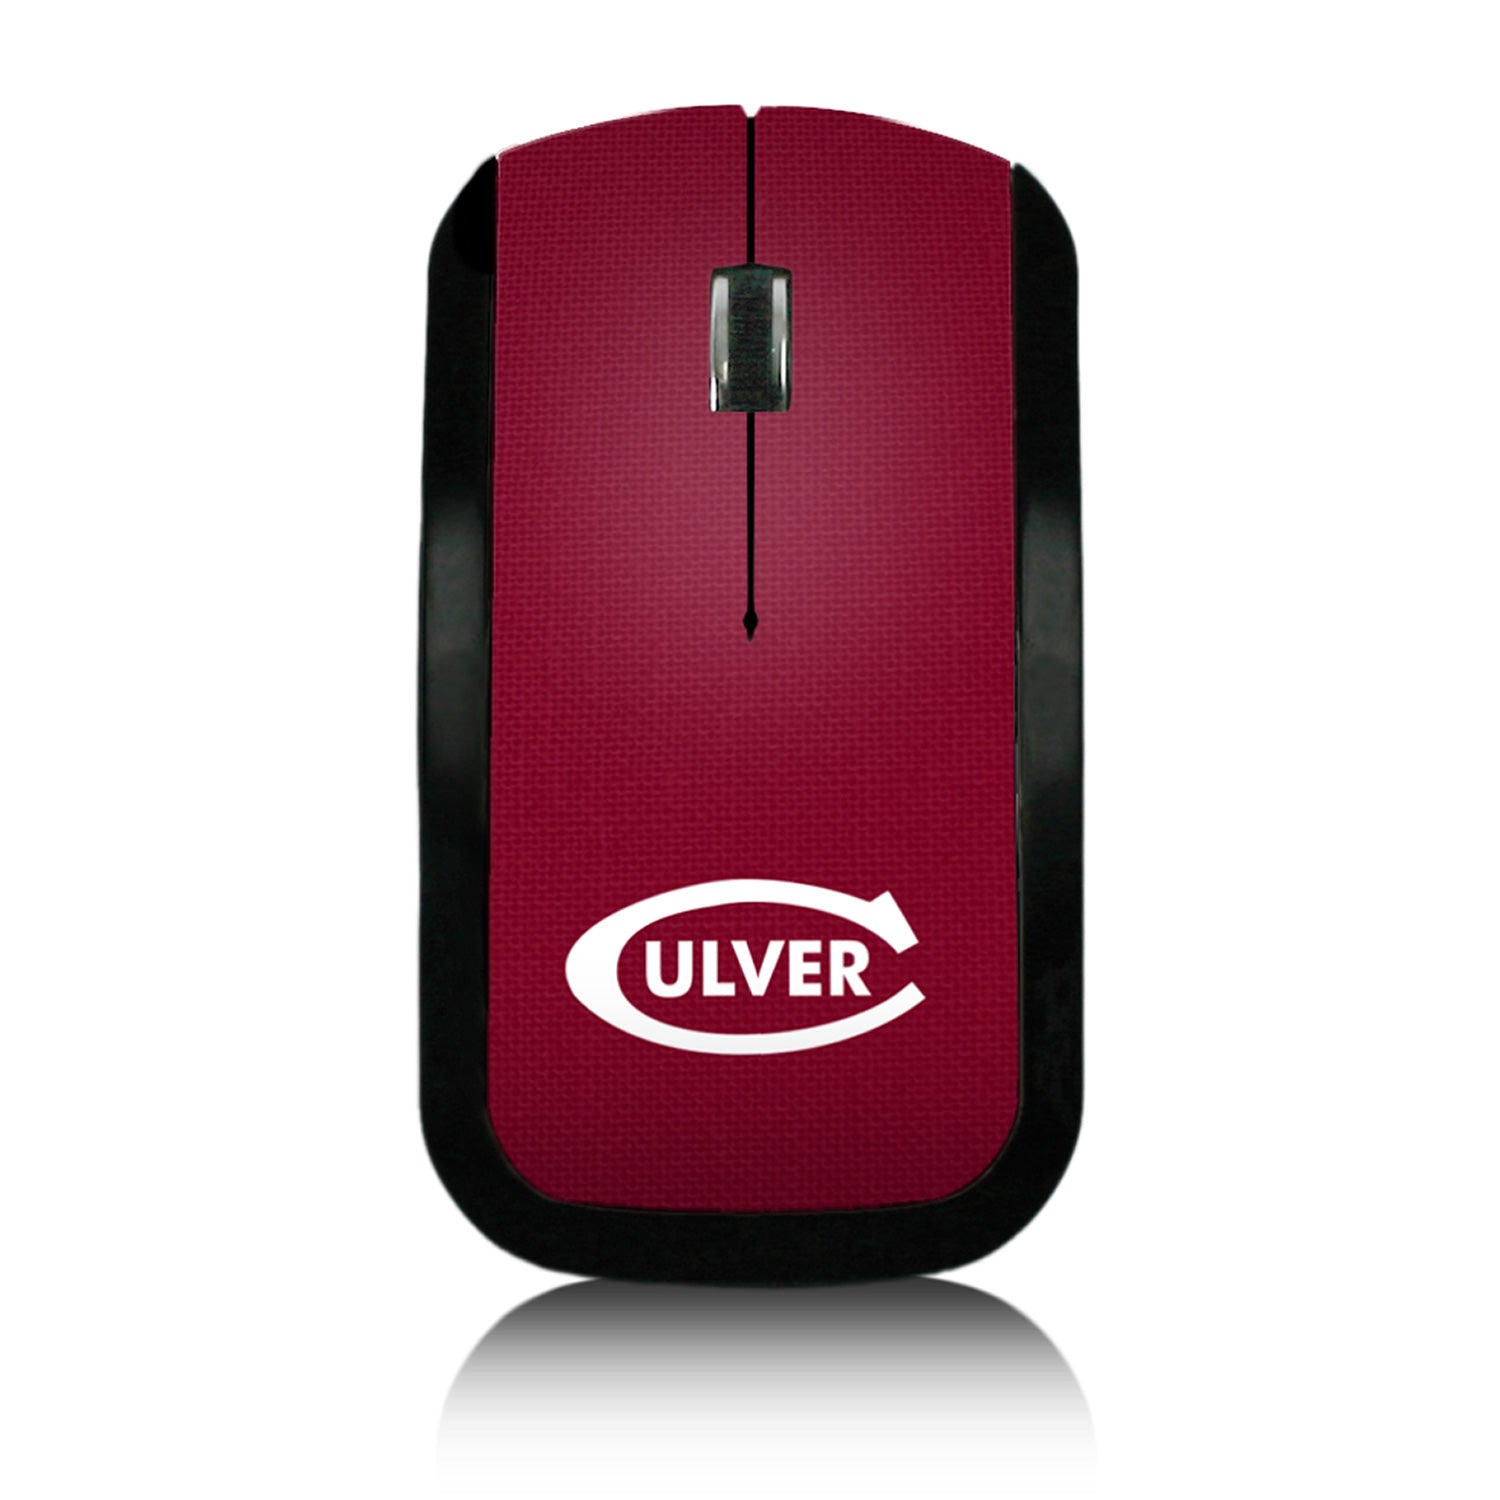 Culver Wireless Mouse